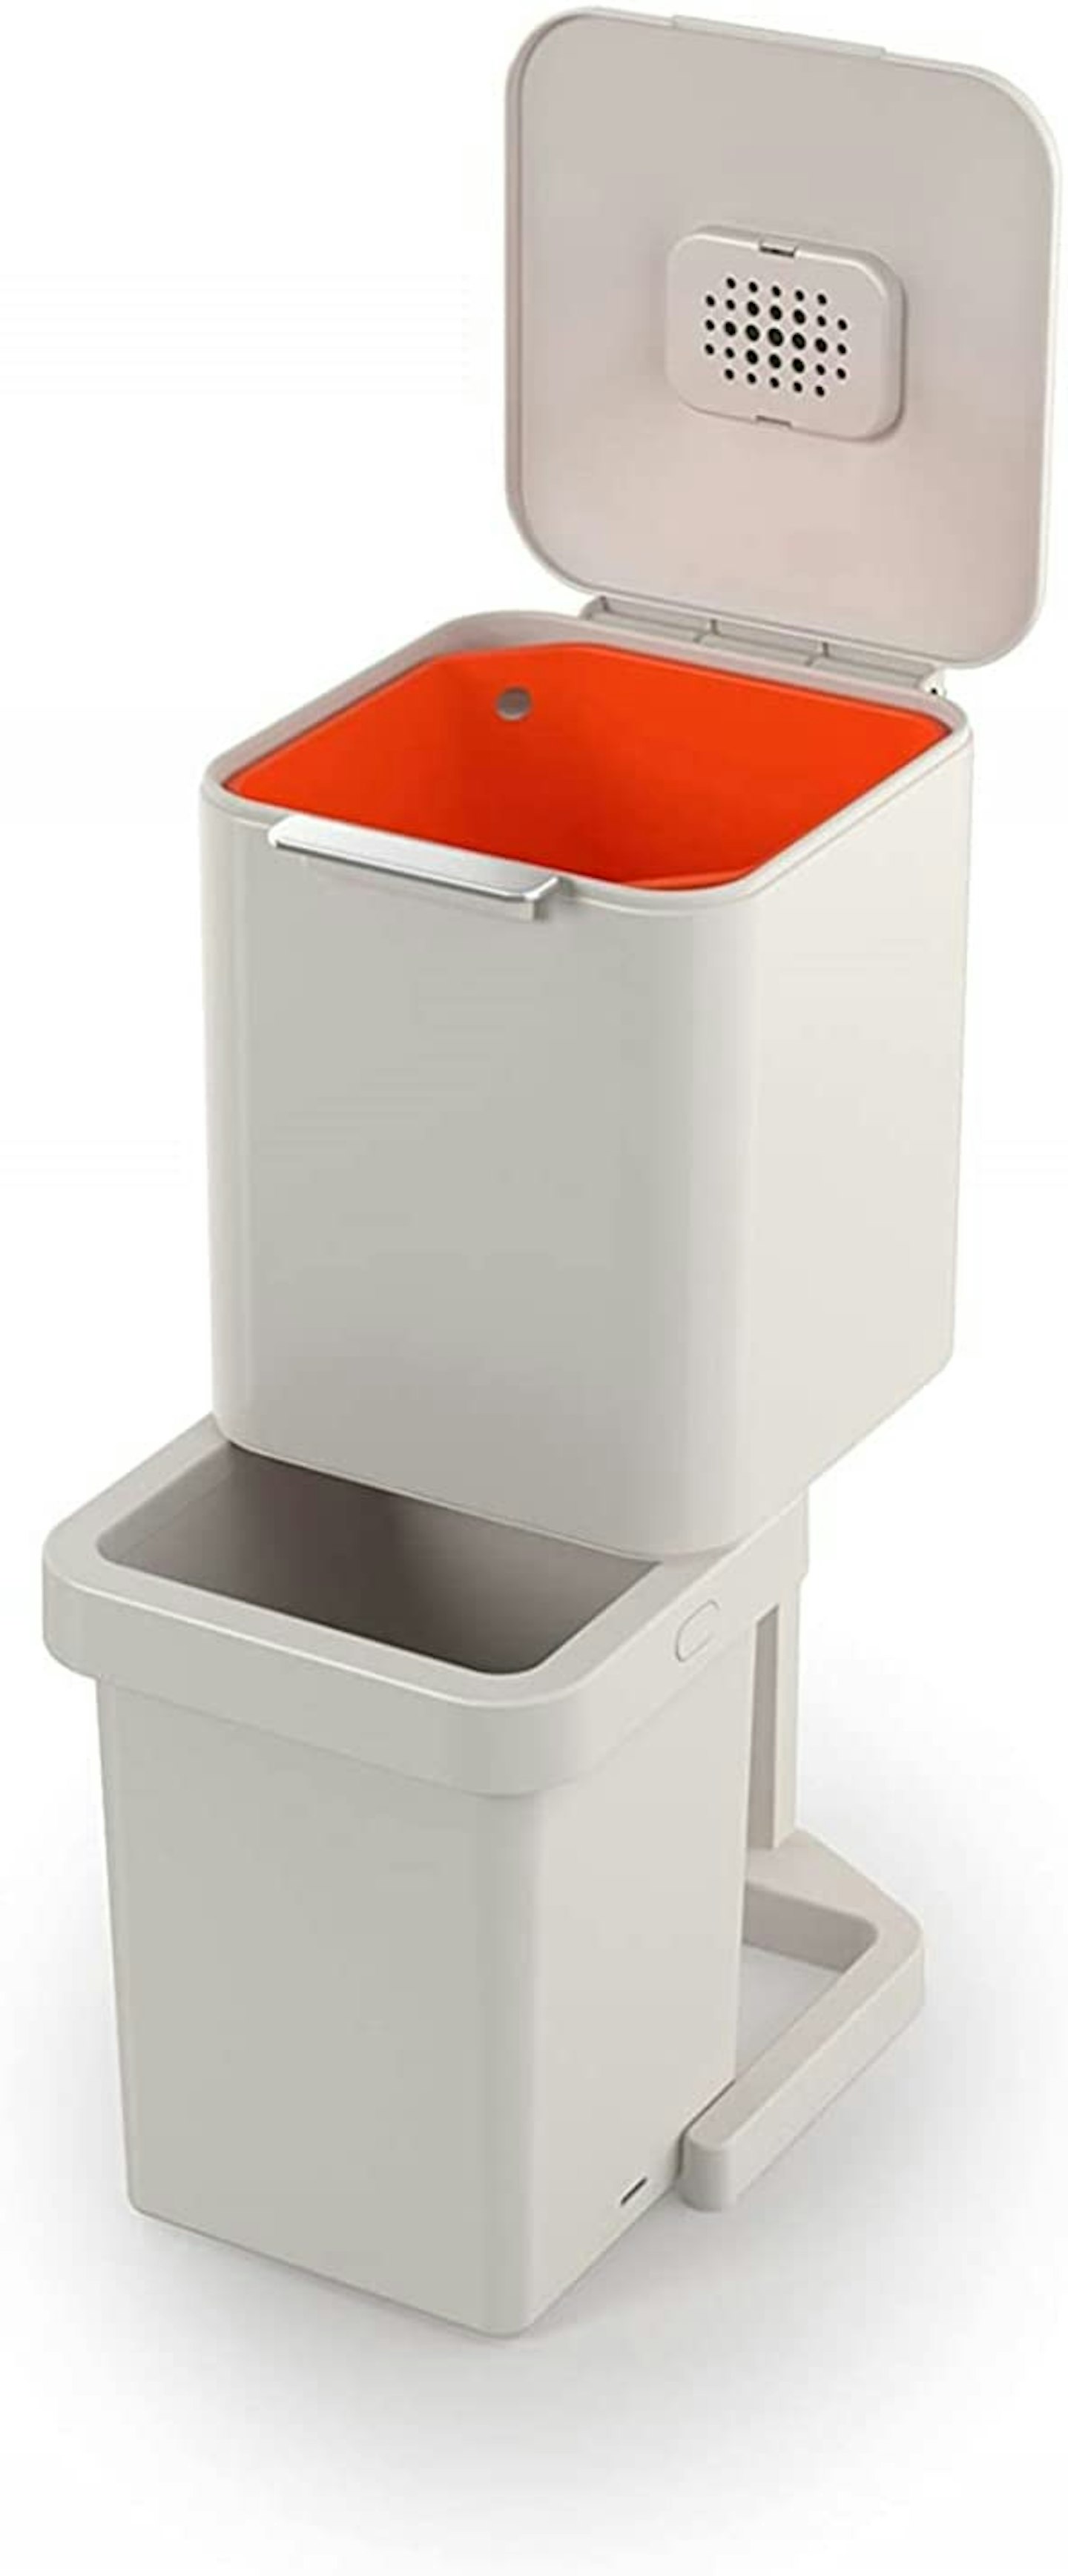 Joseph Joseph, 40 Litre Waste Separation And recycling Bin, WAS £149 NOW £103.99